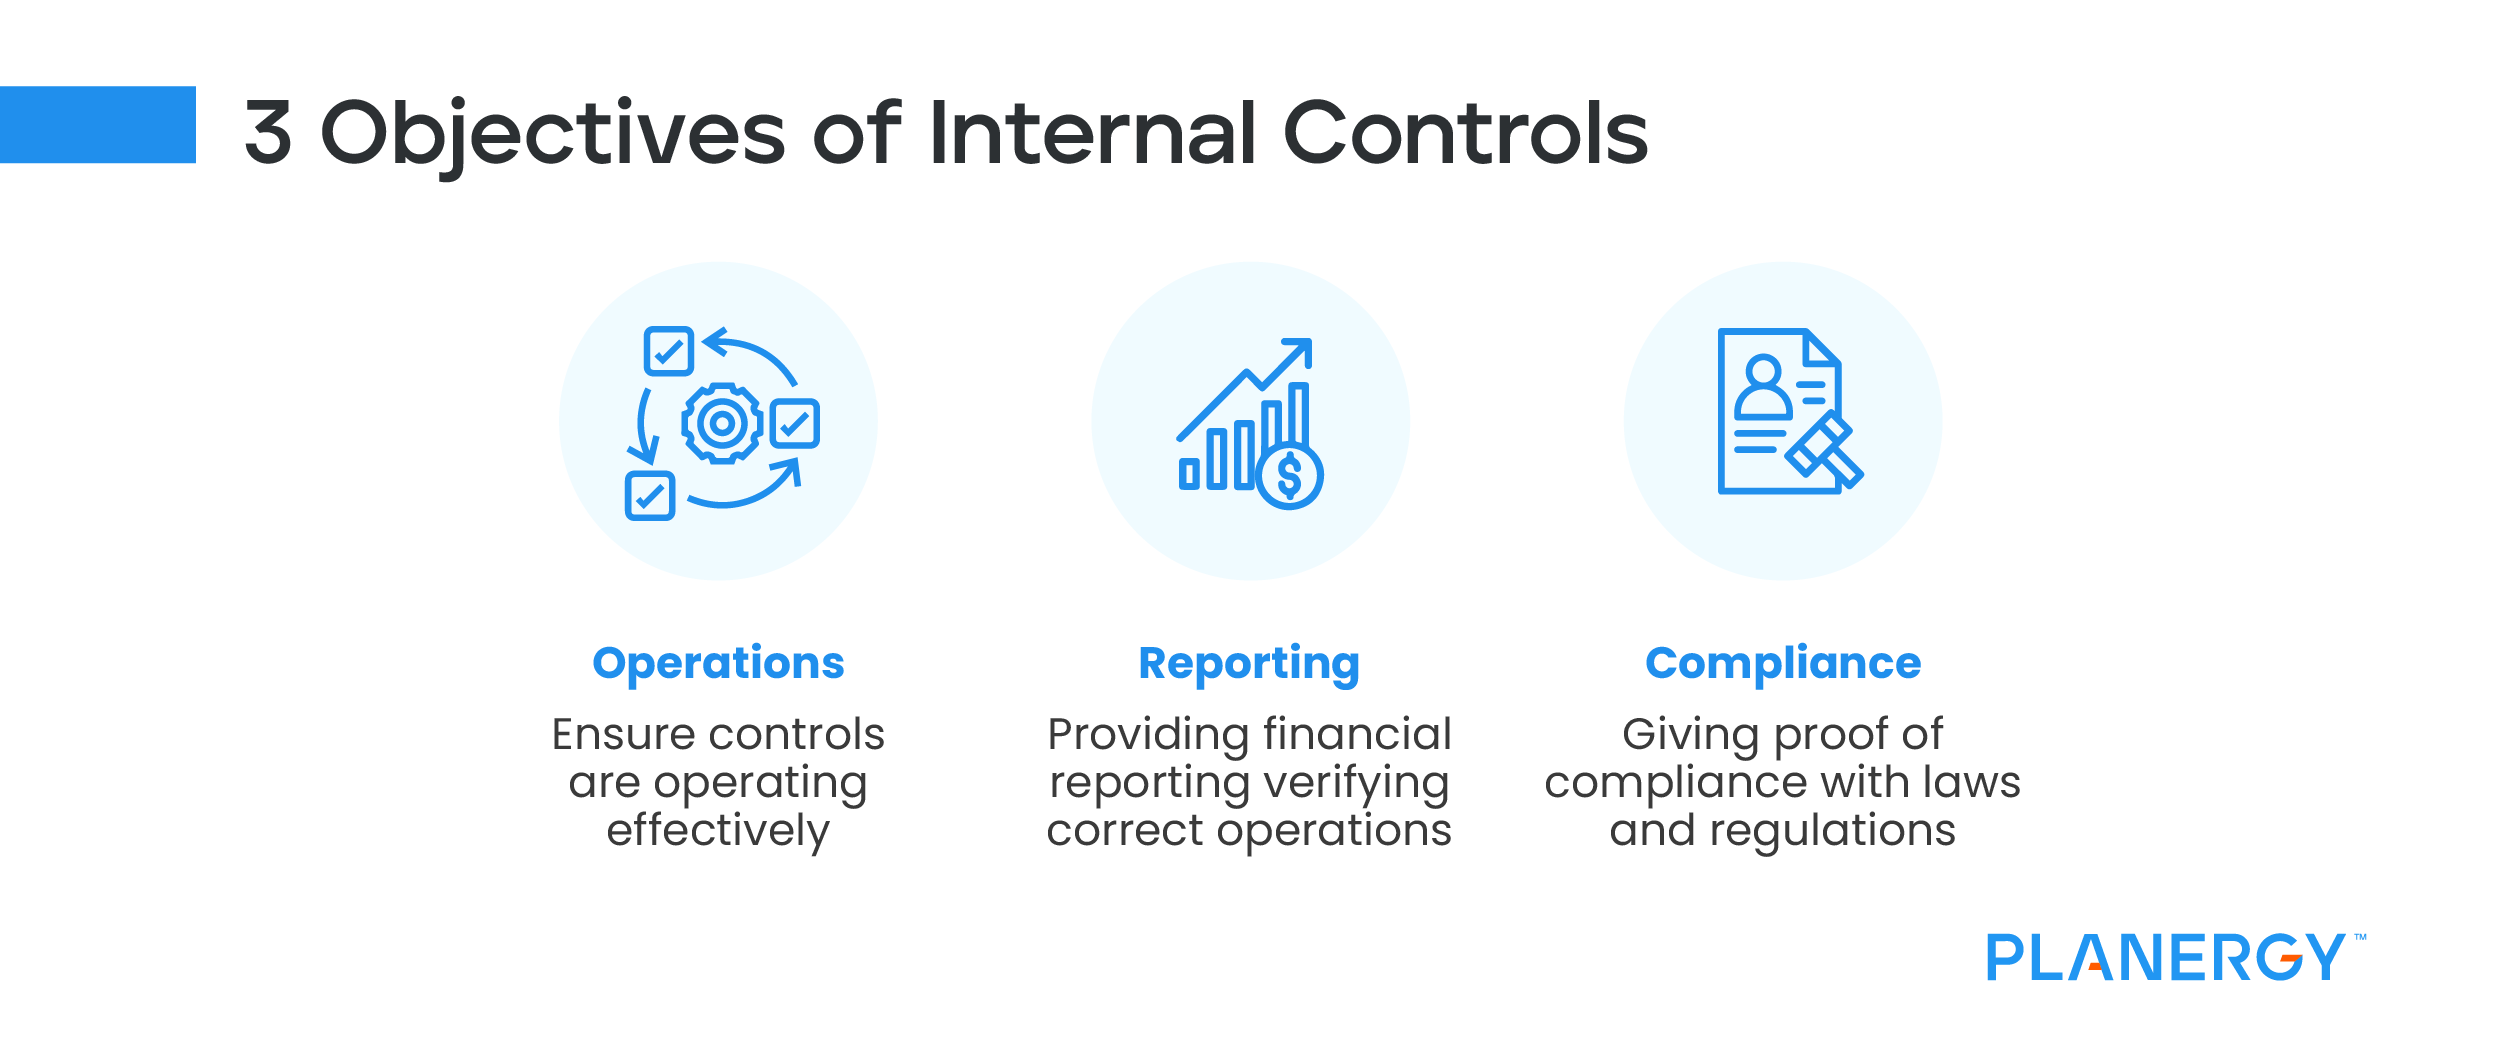 3 Objectives of Internal Controls